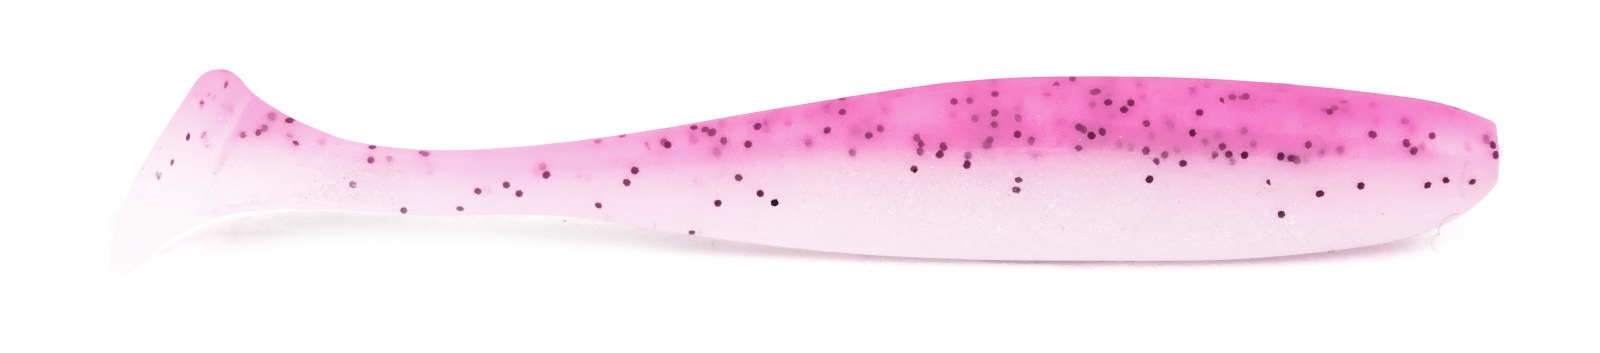 Esche-siliconiche-soft-baits-swimbaits-shad-tail-code-keitech-easy-shiner-it02-pink-pearl-lurefishing-planet.